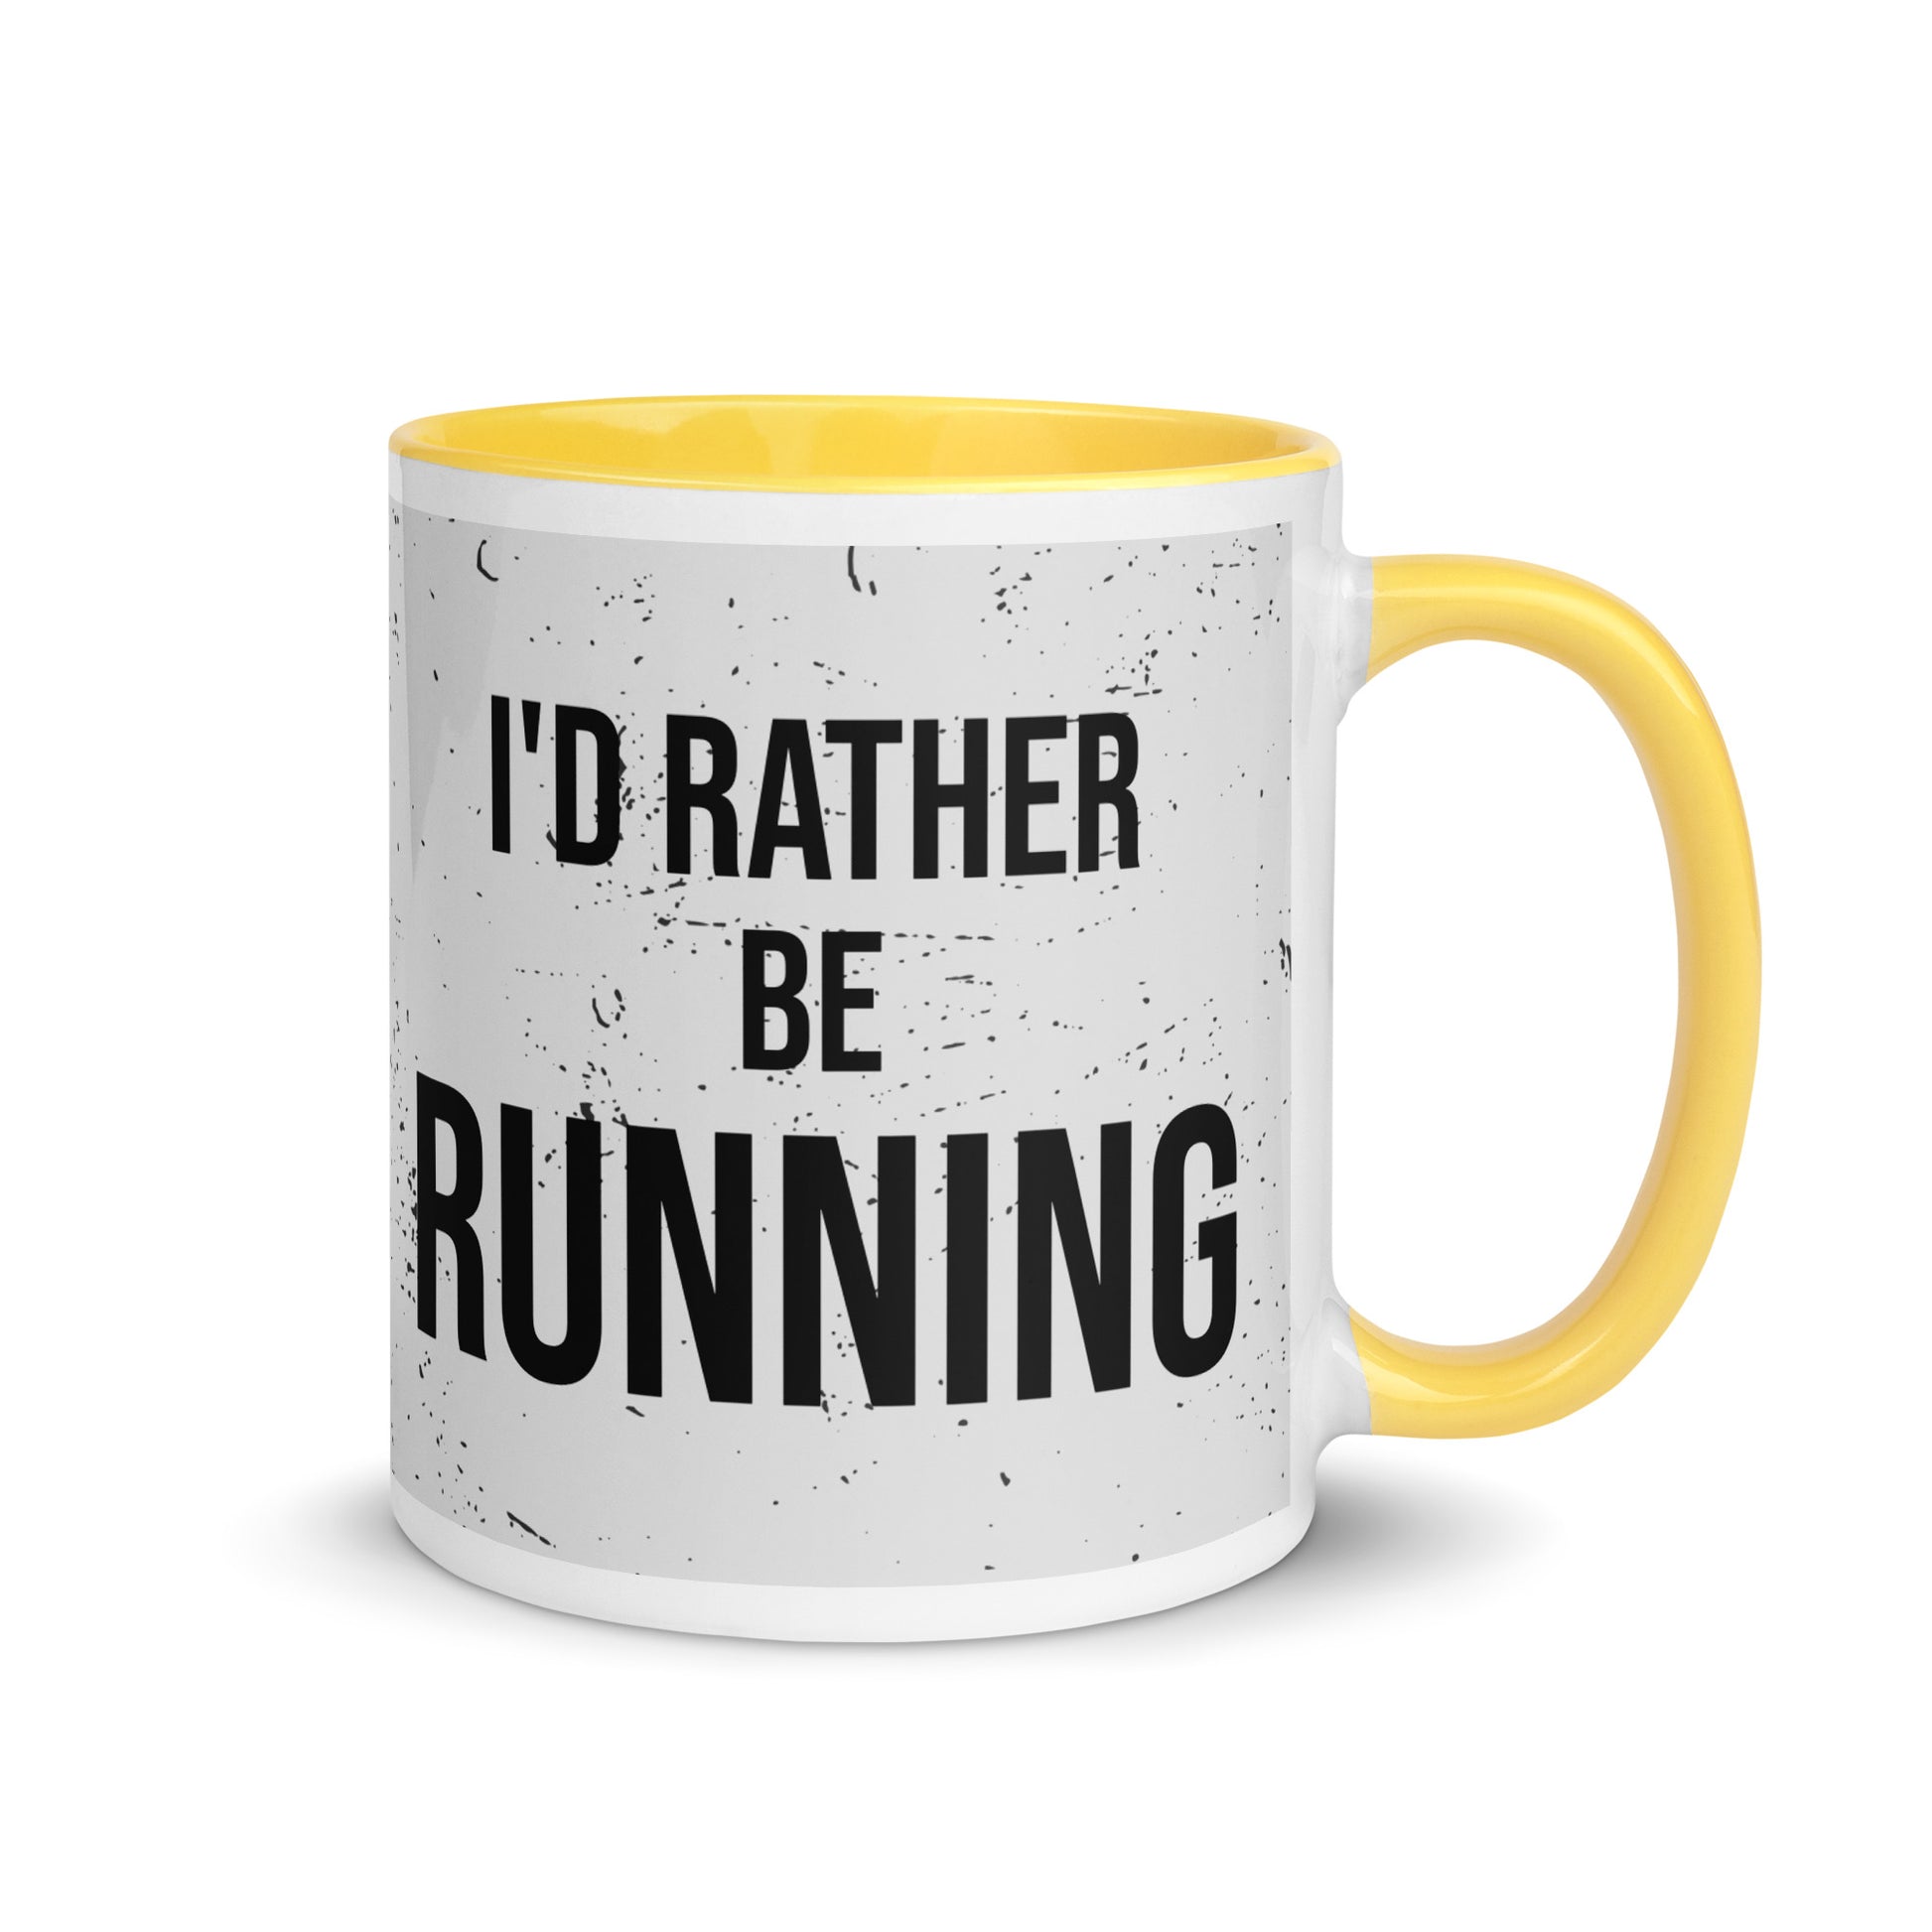 yellow handled mug with a grey splatter design and the phrase I'd rather be running in a black font. the perfect gift for a runner